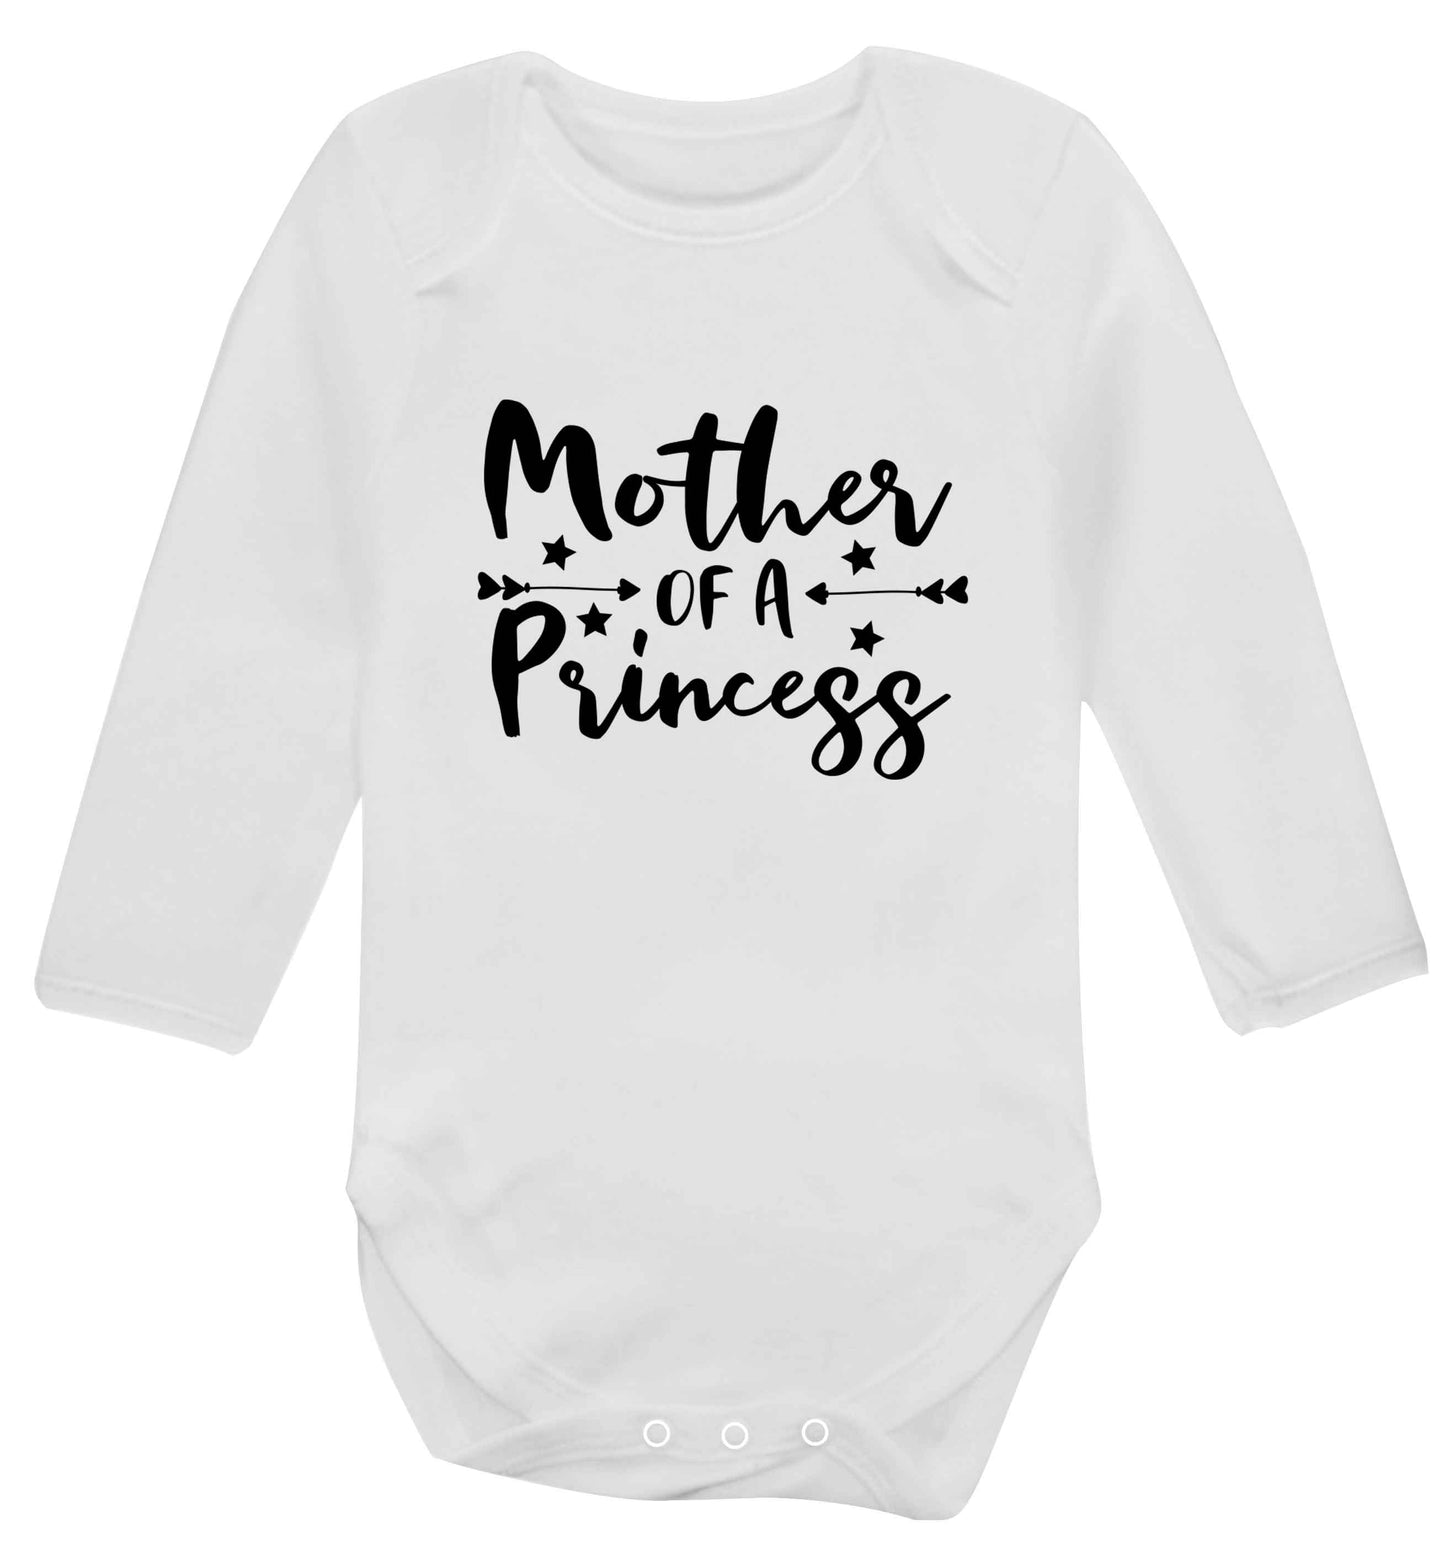 Mother of a princess baby vest long sleeved white 6-12 months